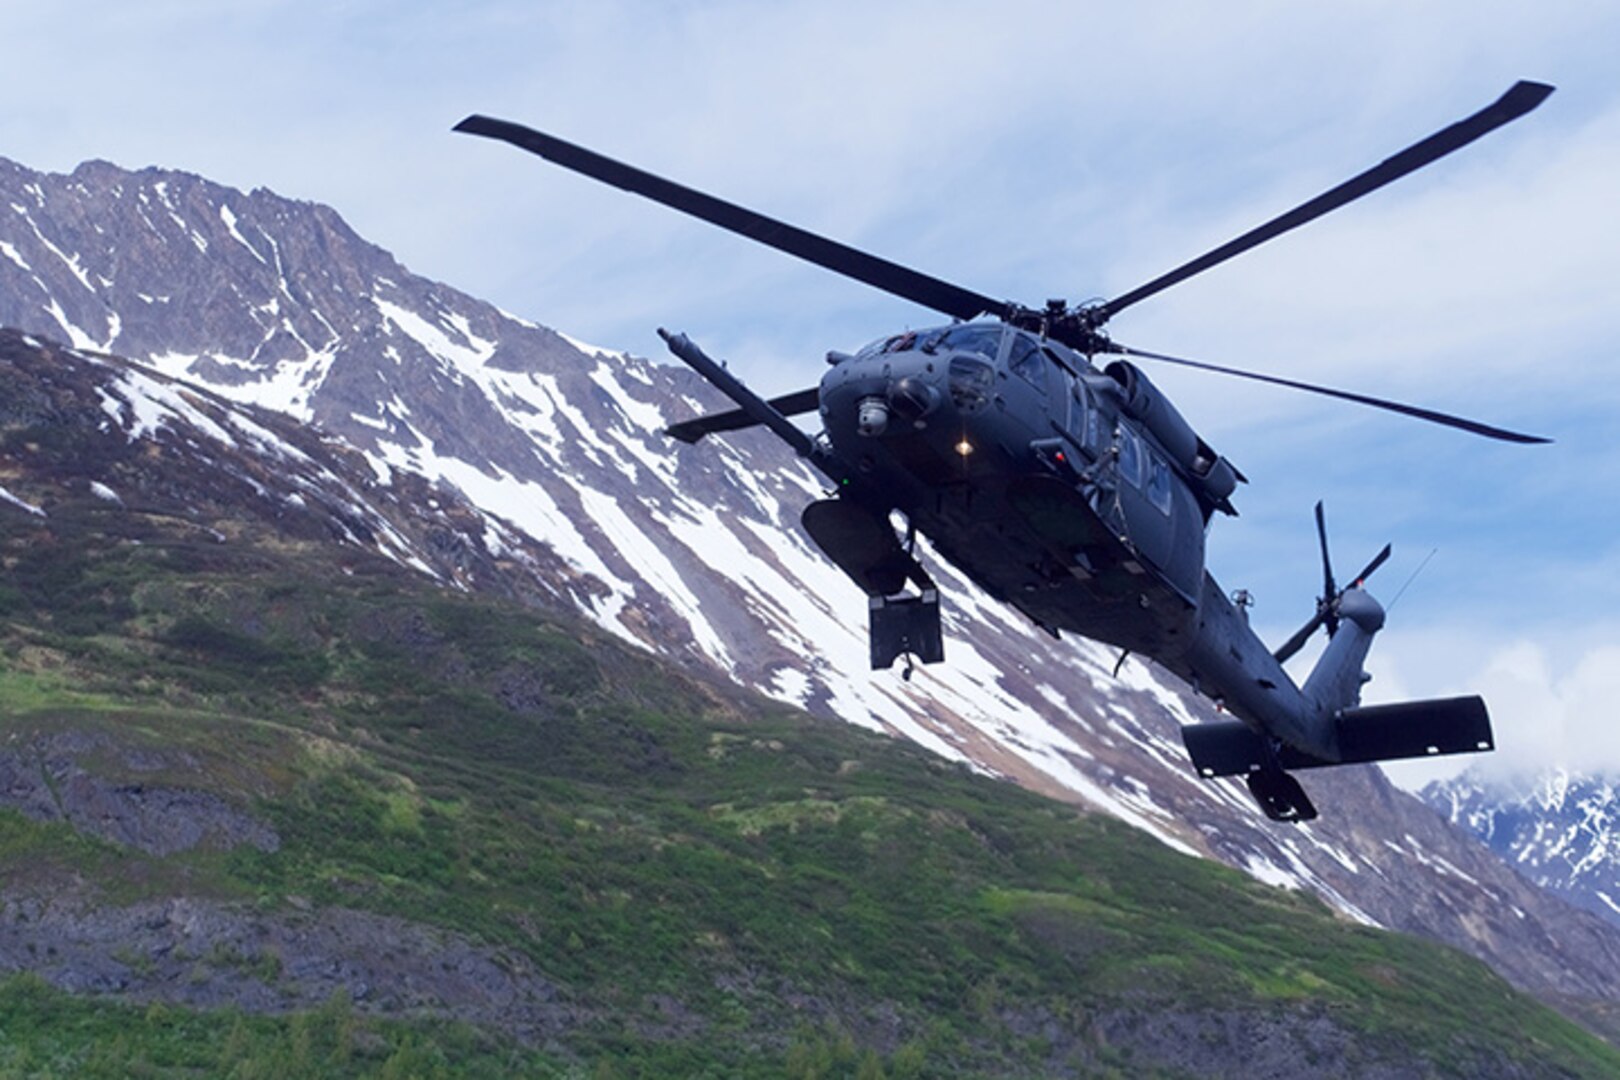 A 210th Rescue Squadron HH-60G Pave Hawk conducts hoist training June 5, 2018, at Eklutna Glacier during a fini flight for Chief Master Sgt. Lance Jordan, command chief master sergeant for the Alaska Air National Guard. Pararescuemen from a similar craft helped rescue a man Tuesday.